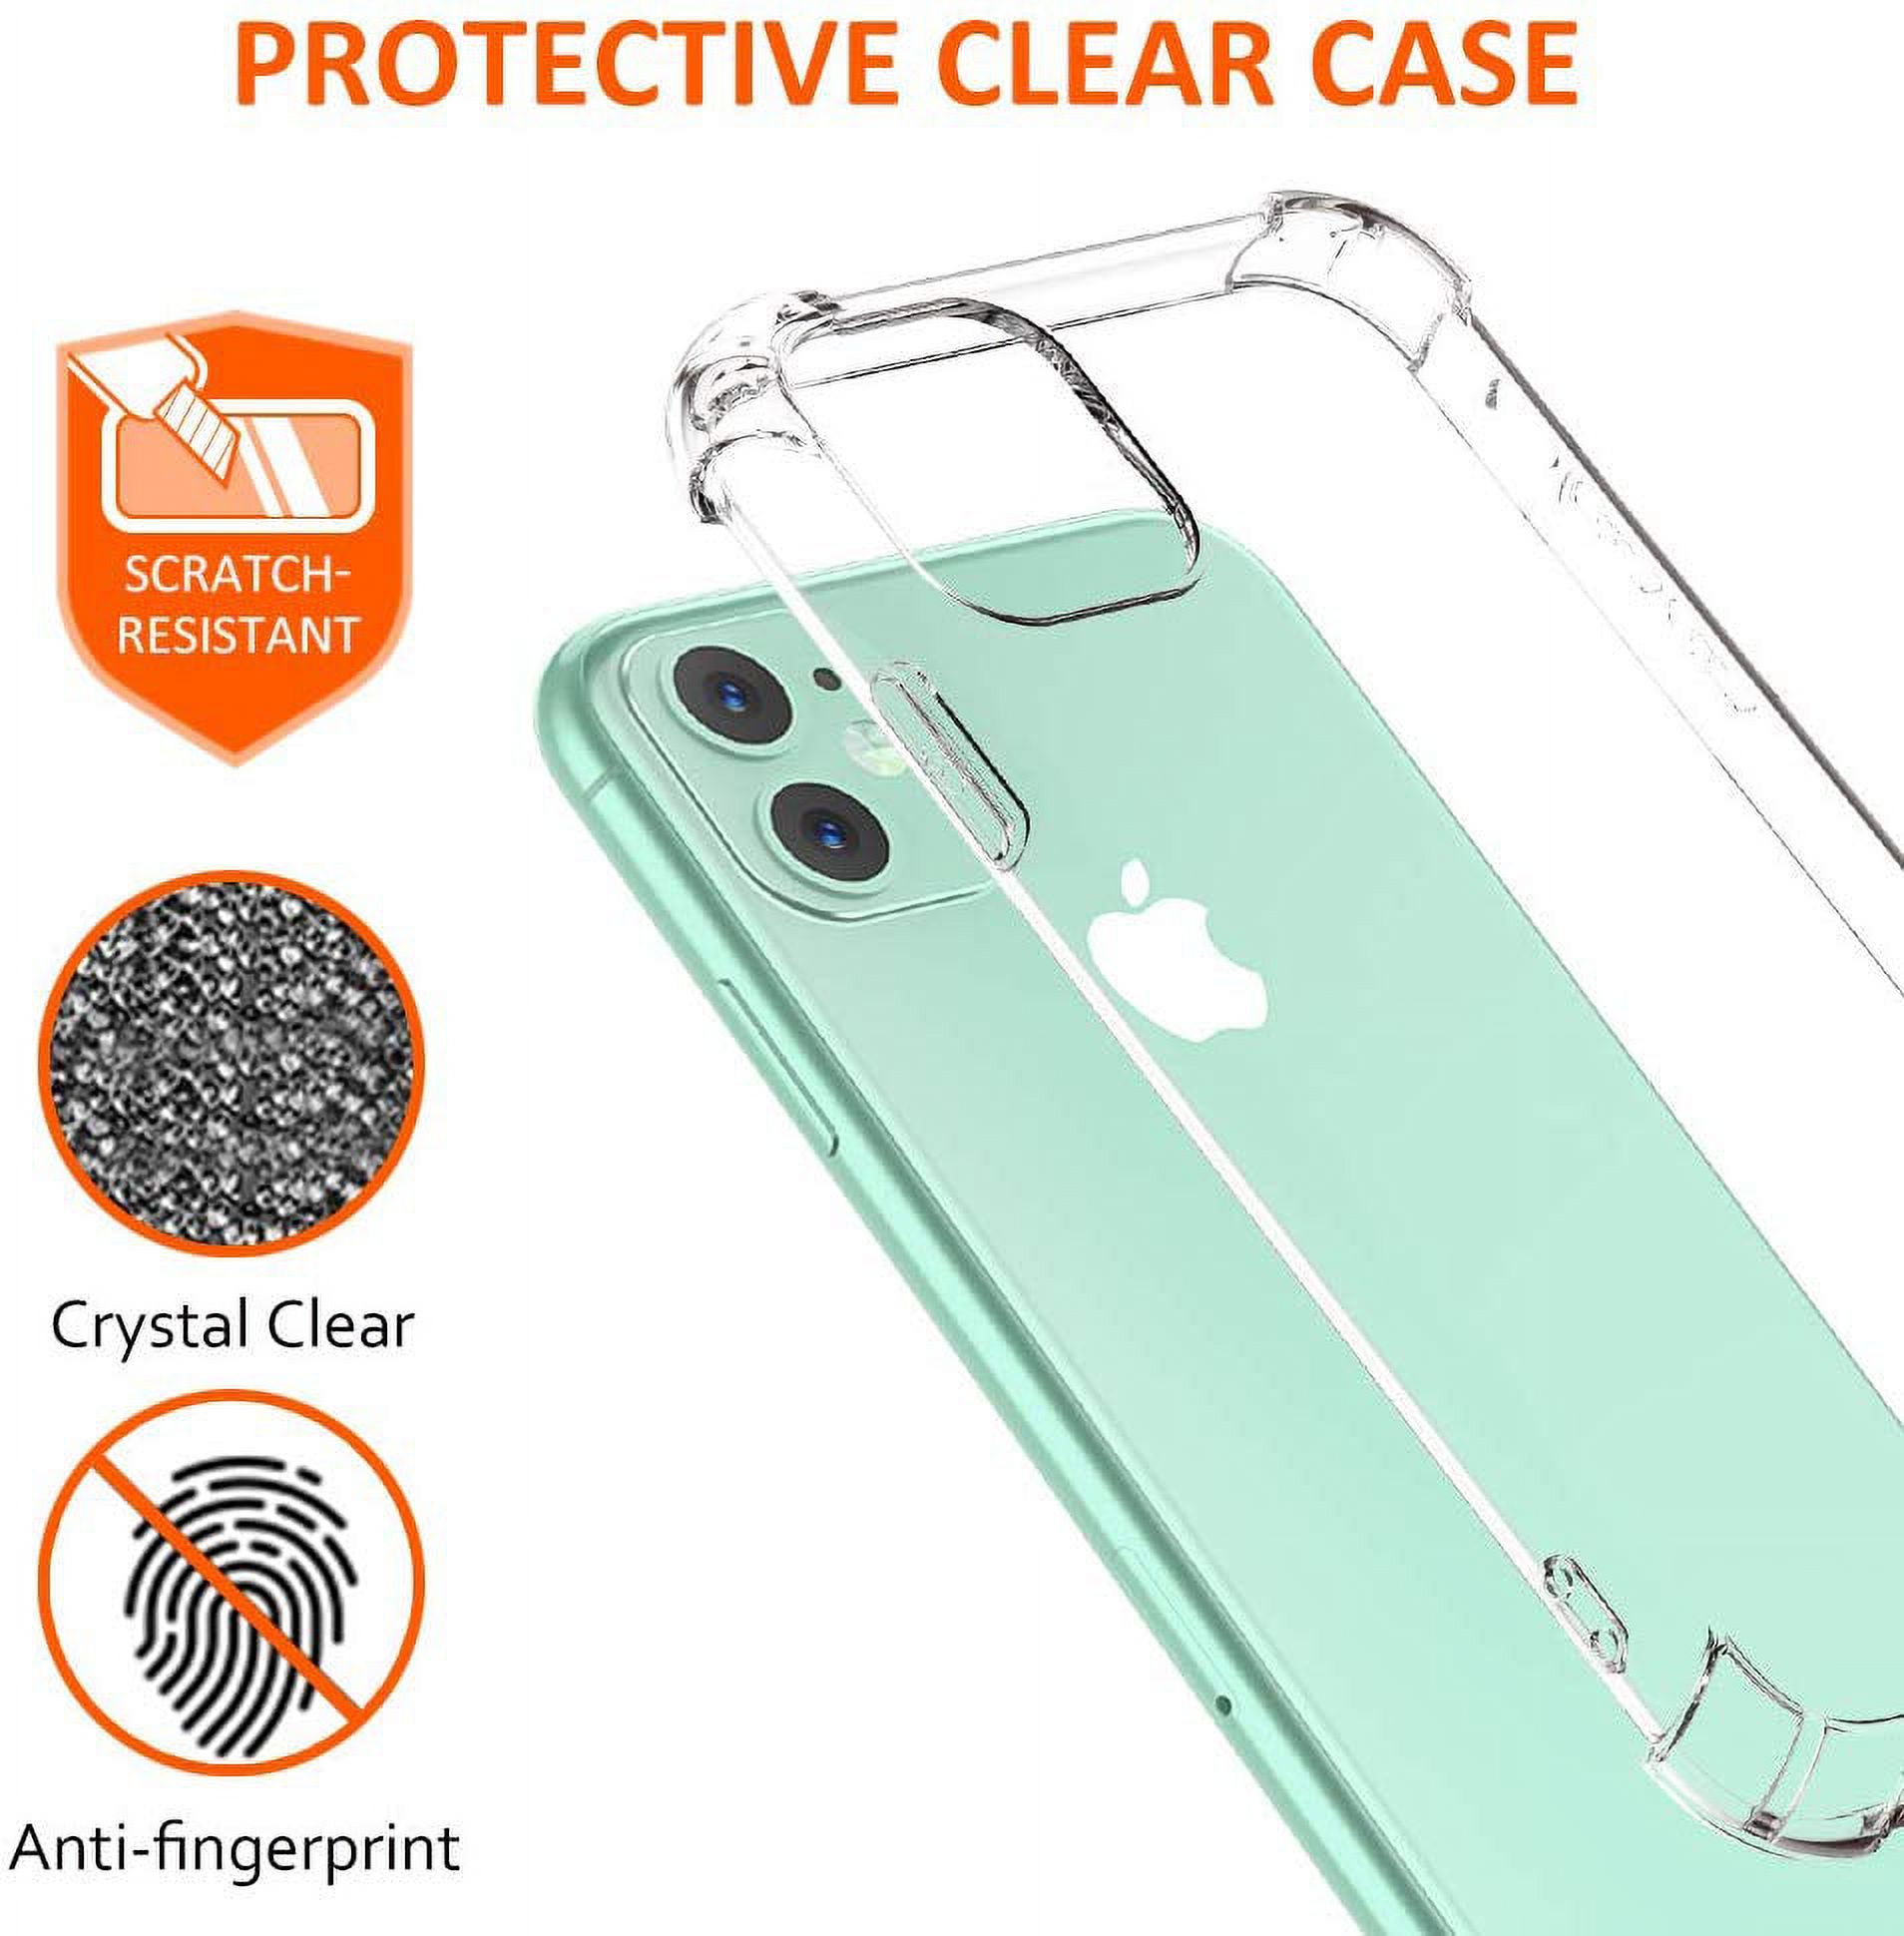 Njjex iPhone 11 / iPhone XR / iPhone 12 Pro Max Case, Njjex iPhone 11 Pro Crystal Clear Shock Absorption Technology Bumper Soft TPU Cover Case For Apple iPhone 11, 12 Mini, 12 Pro Max - image 4 of 6